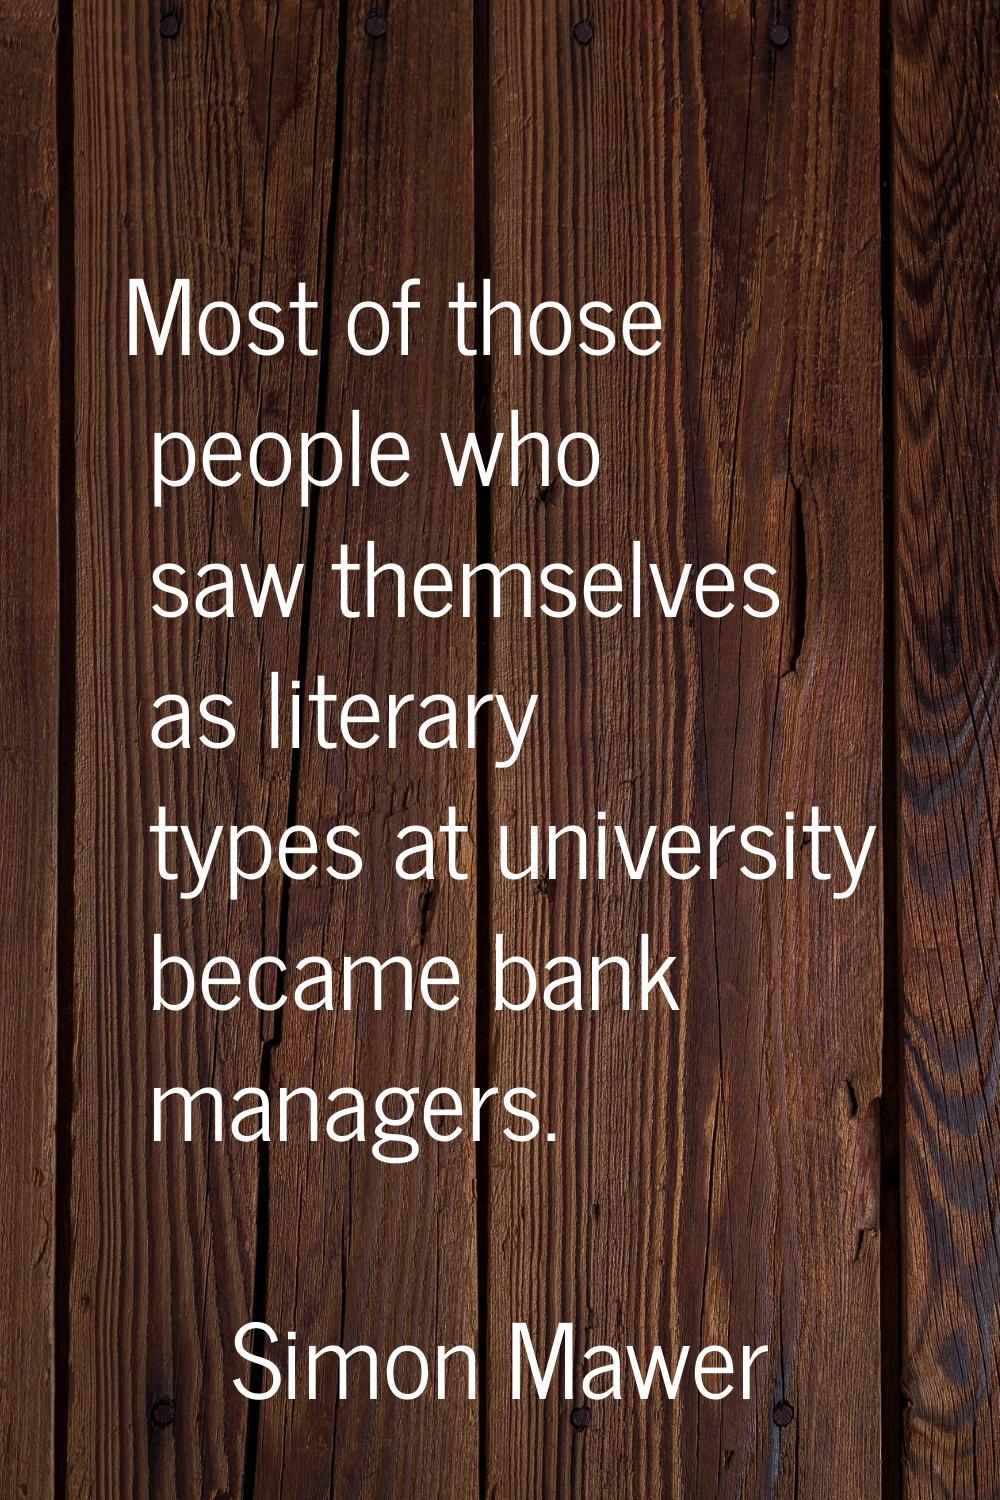 Most of those people who saw themselves as literary types at university became bank managers.